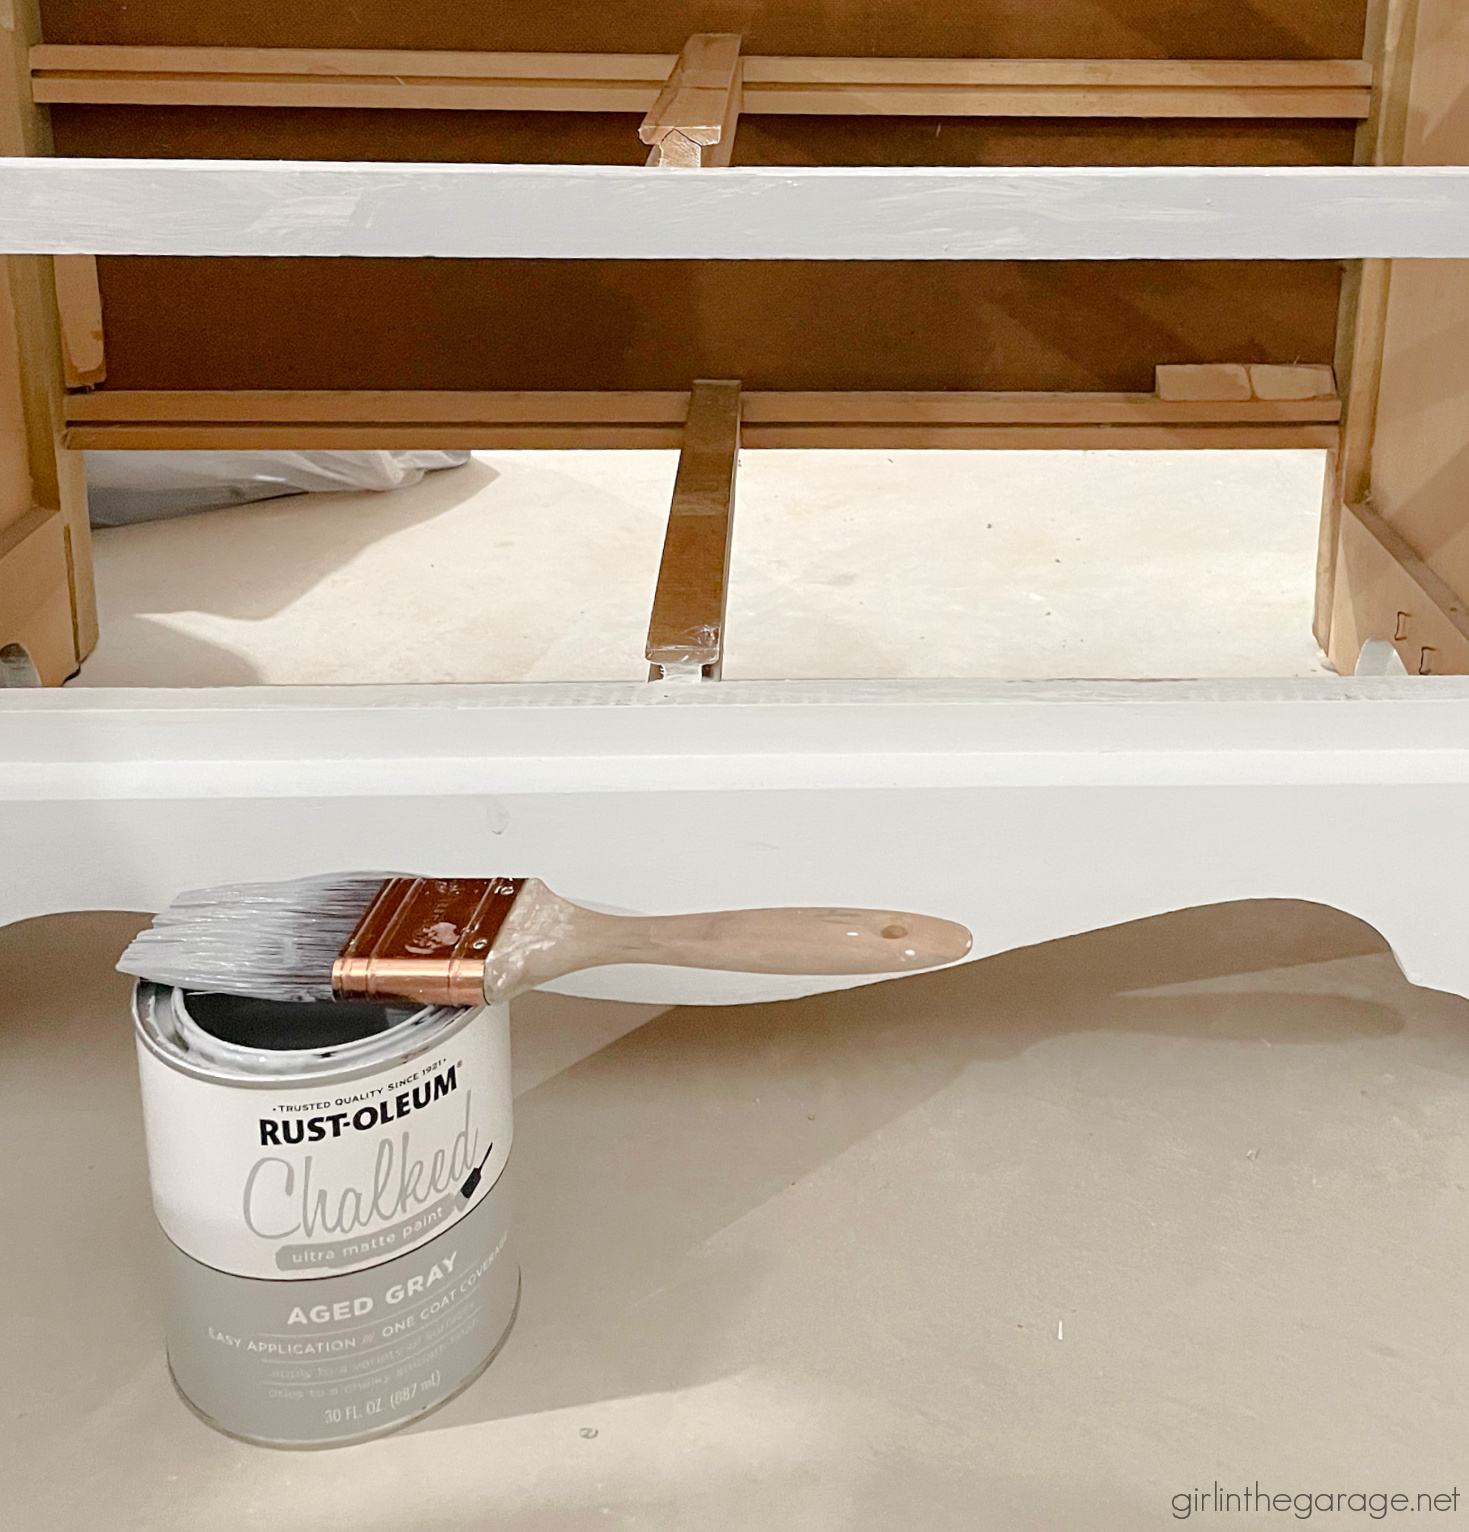 Learn the simple steps for how to repaint a dresser the right way. Complete tutorial by Girl in the Garage.